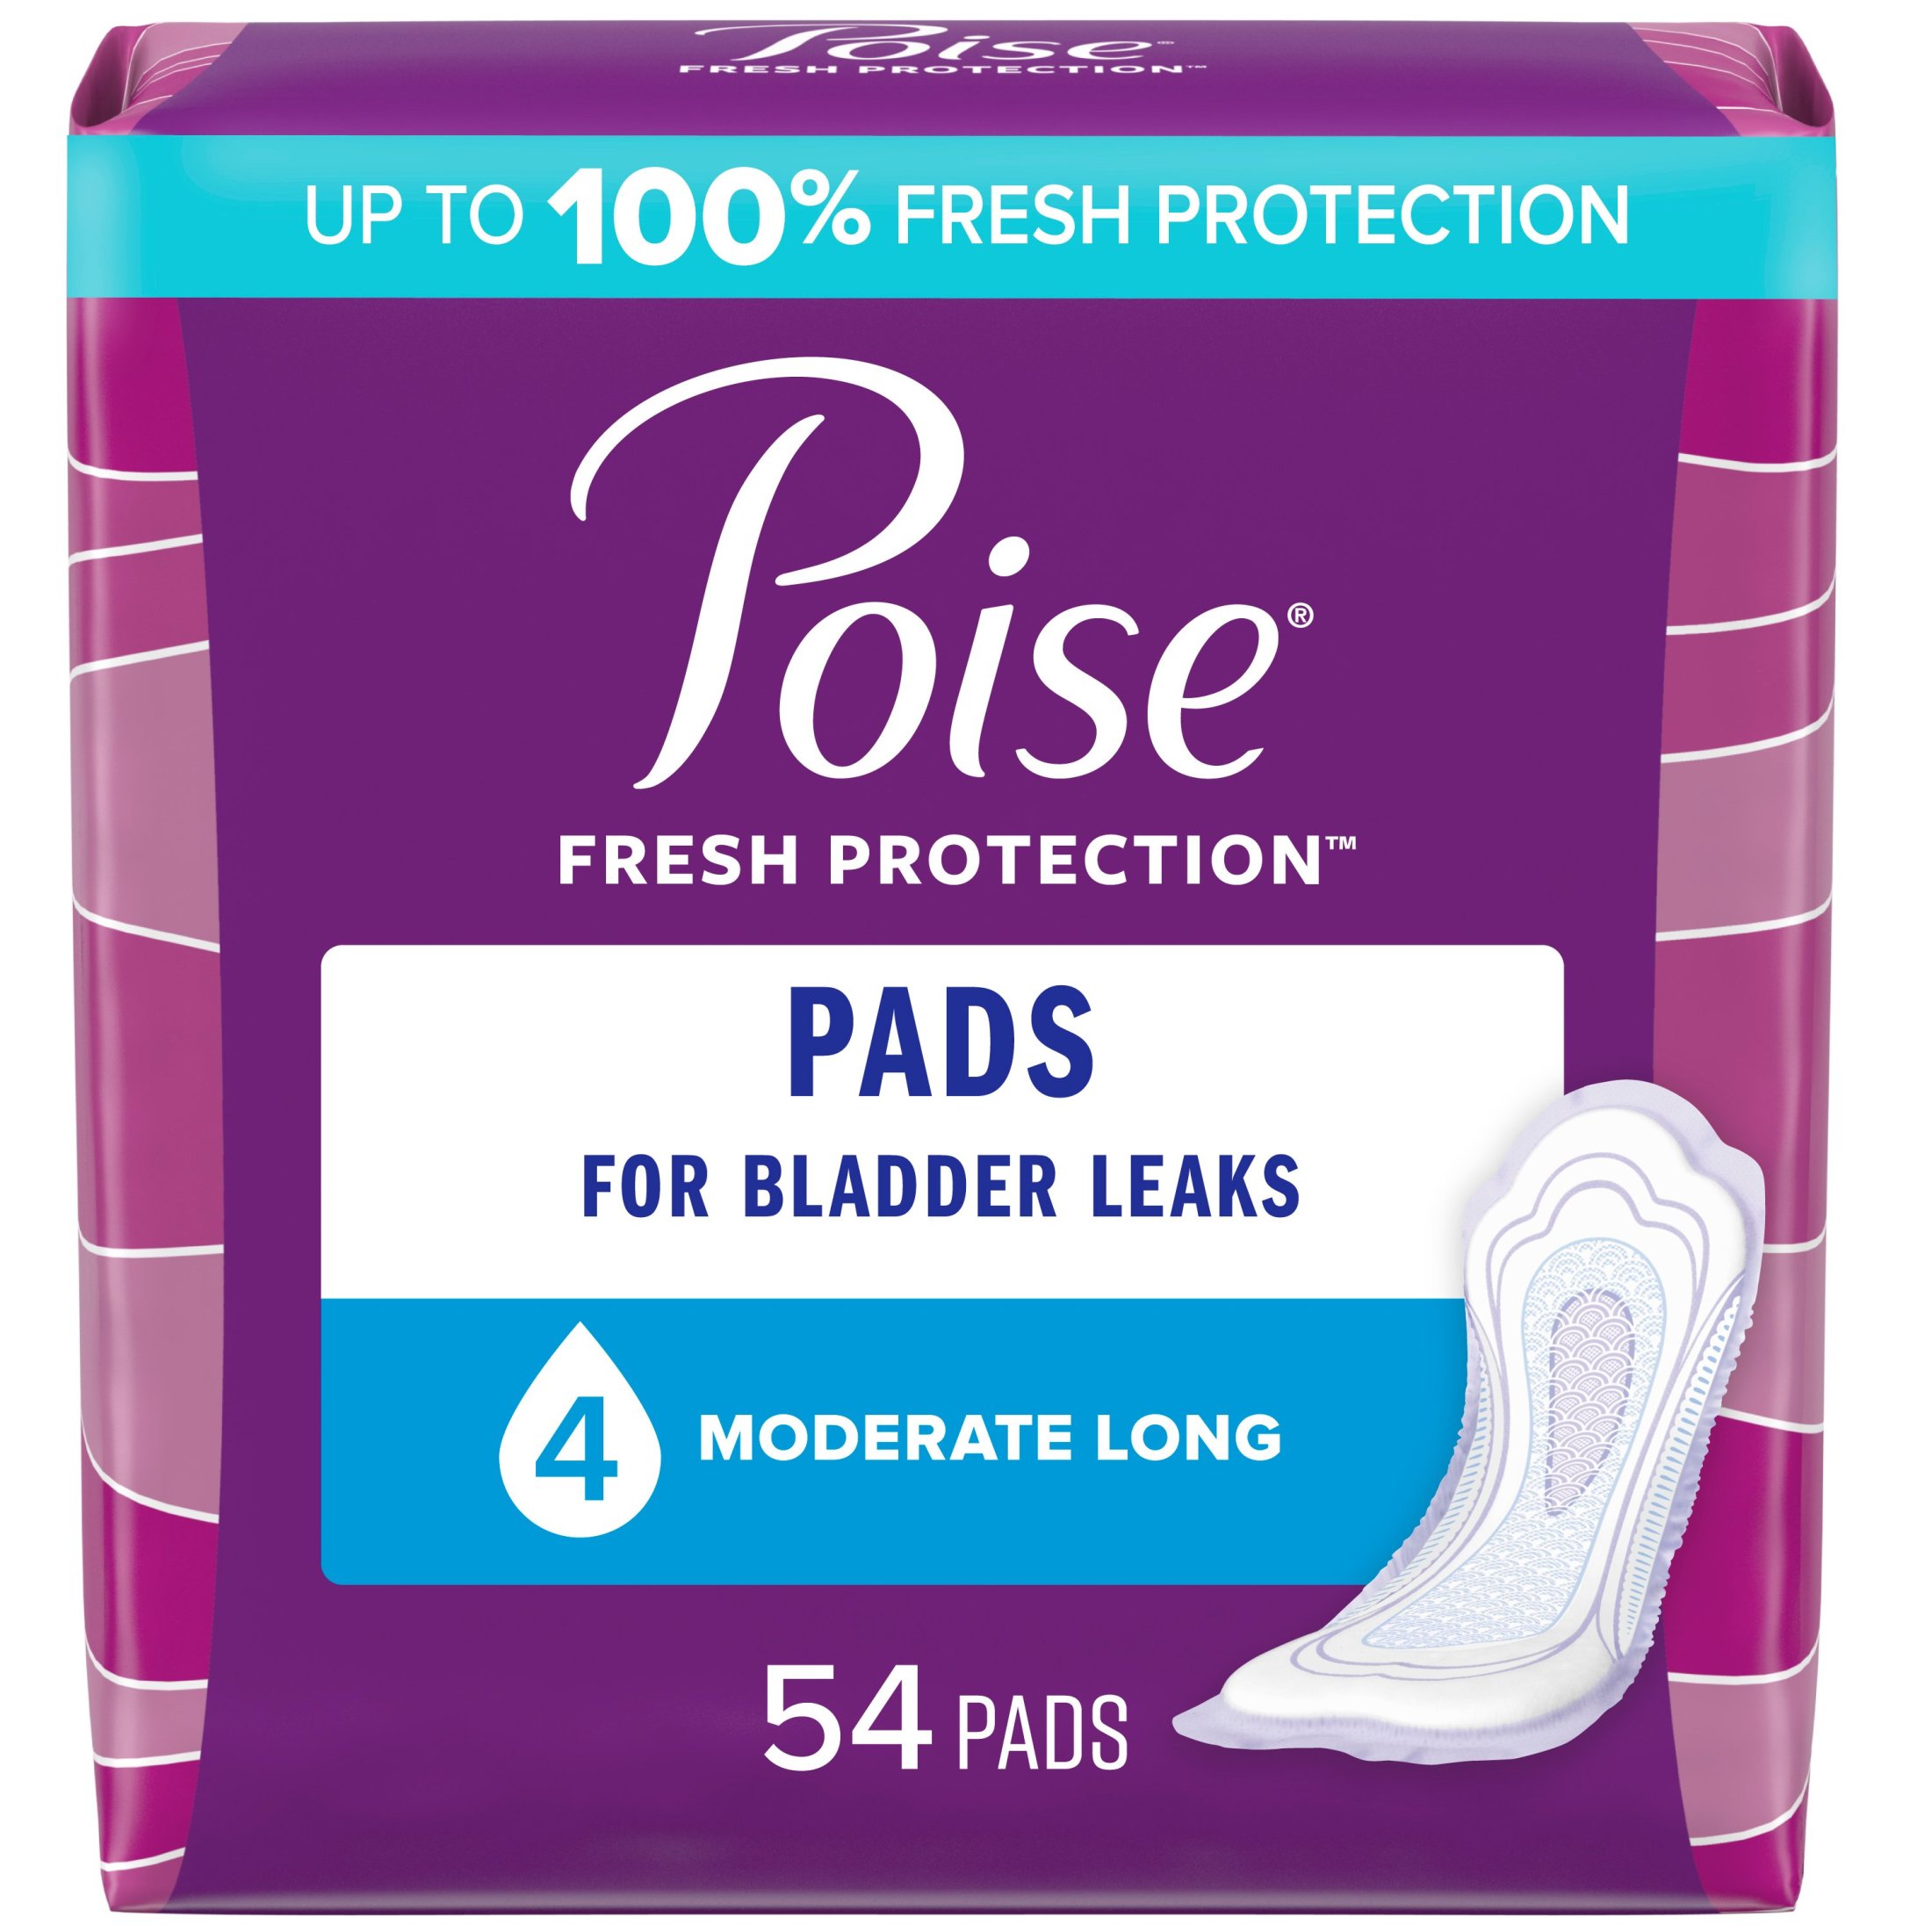 Poise Incontinence Pads for Women, 4 Drop, Moderate Absorbency, Long, 54 Count - image 1 of 8